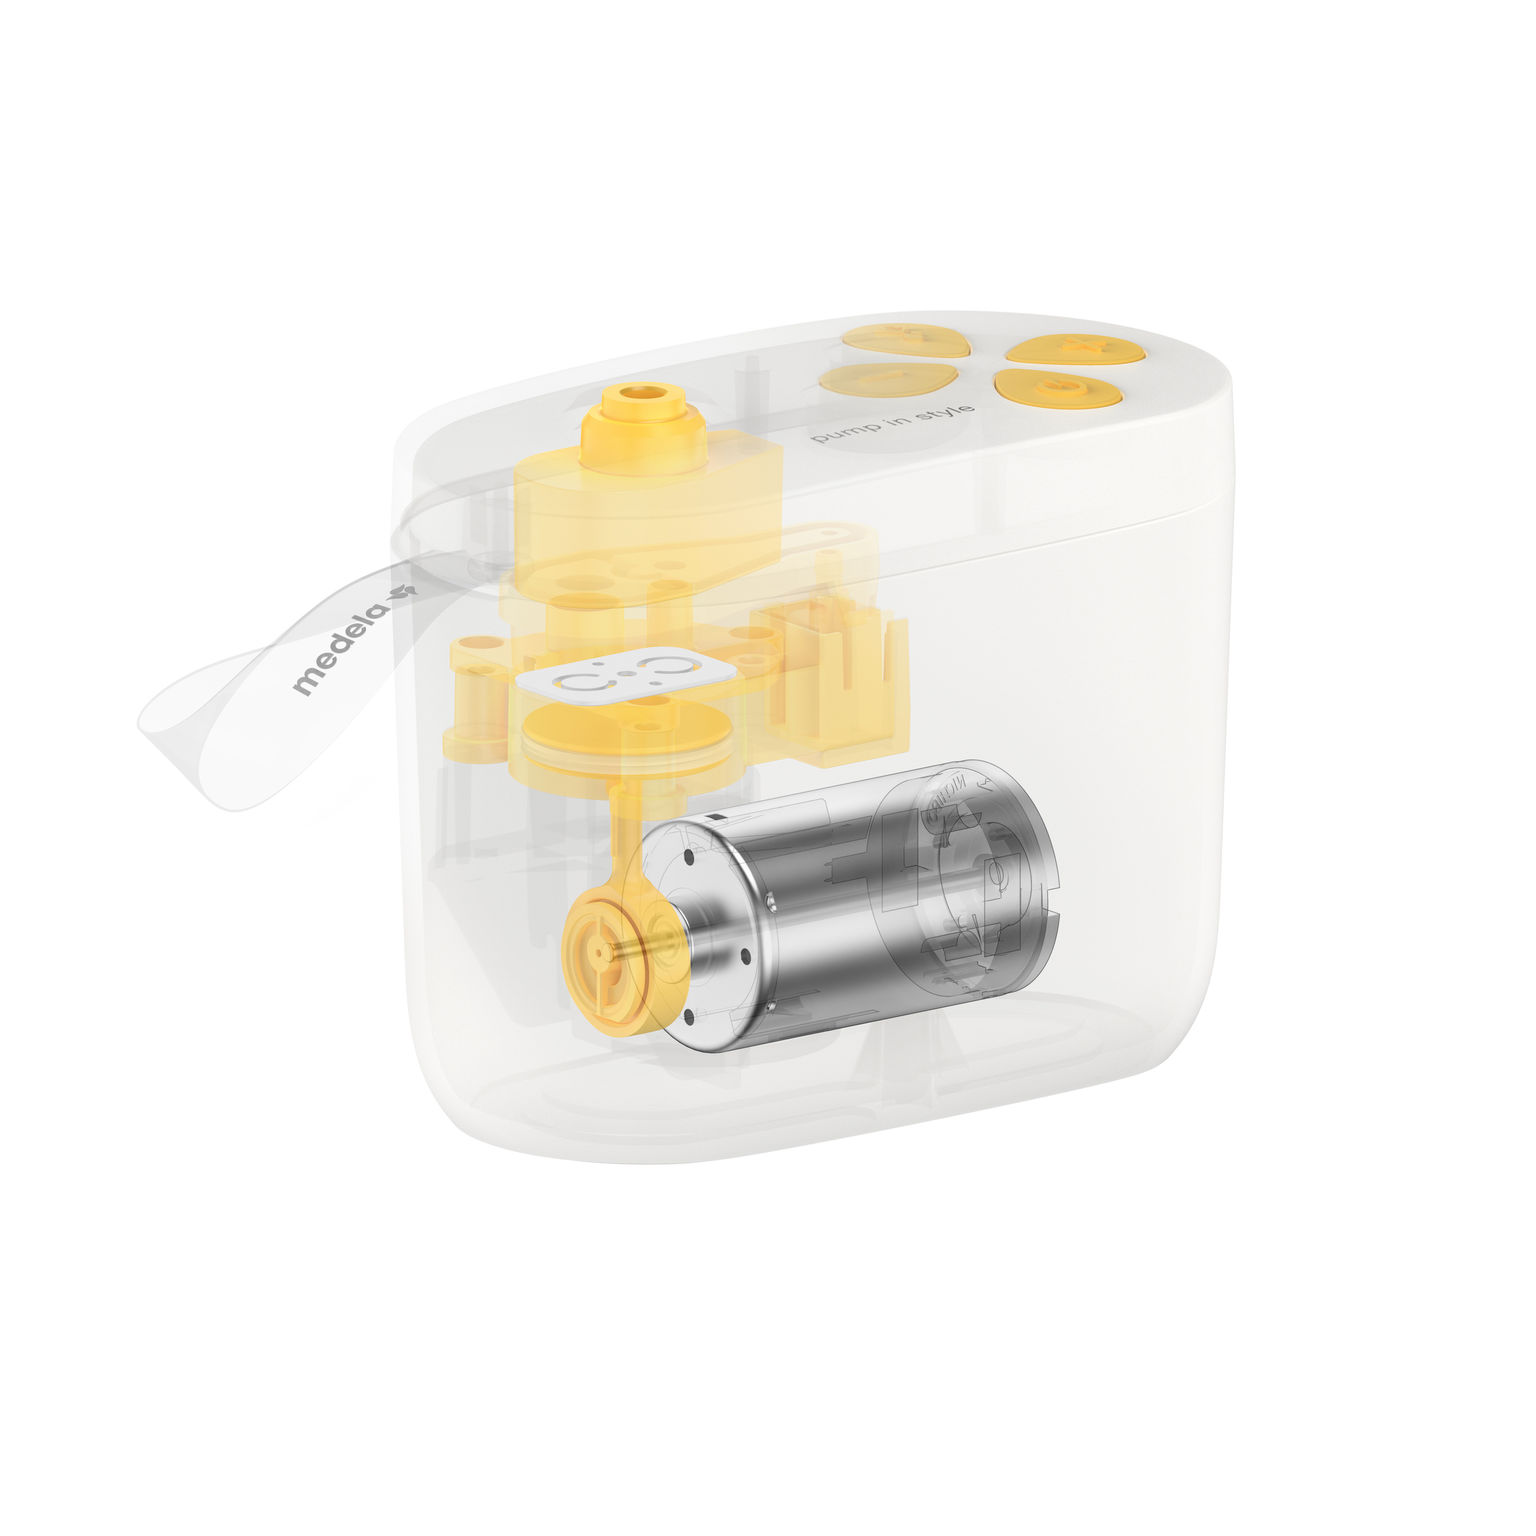 Medela Launches Pump in Style with MaxFlow